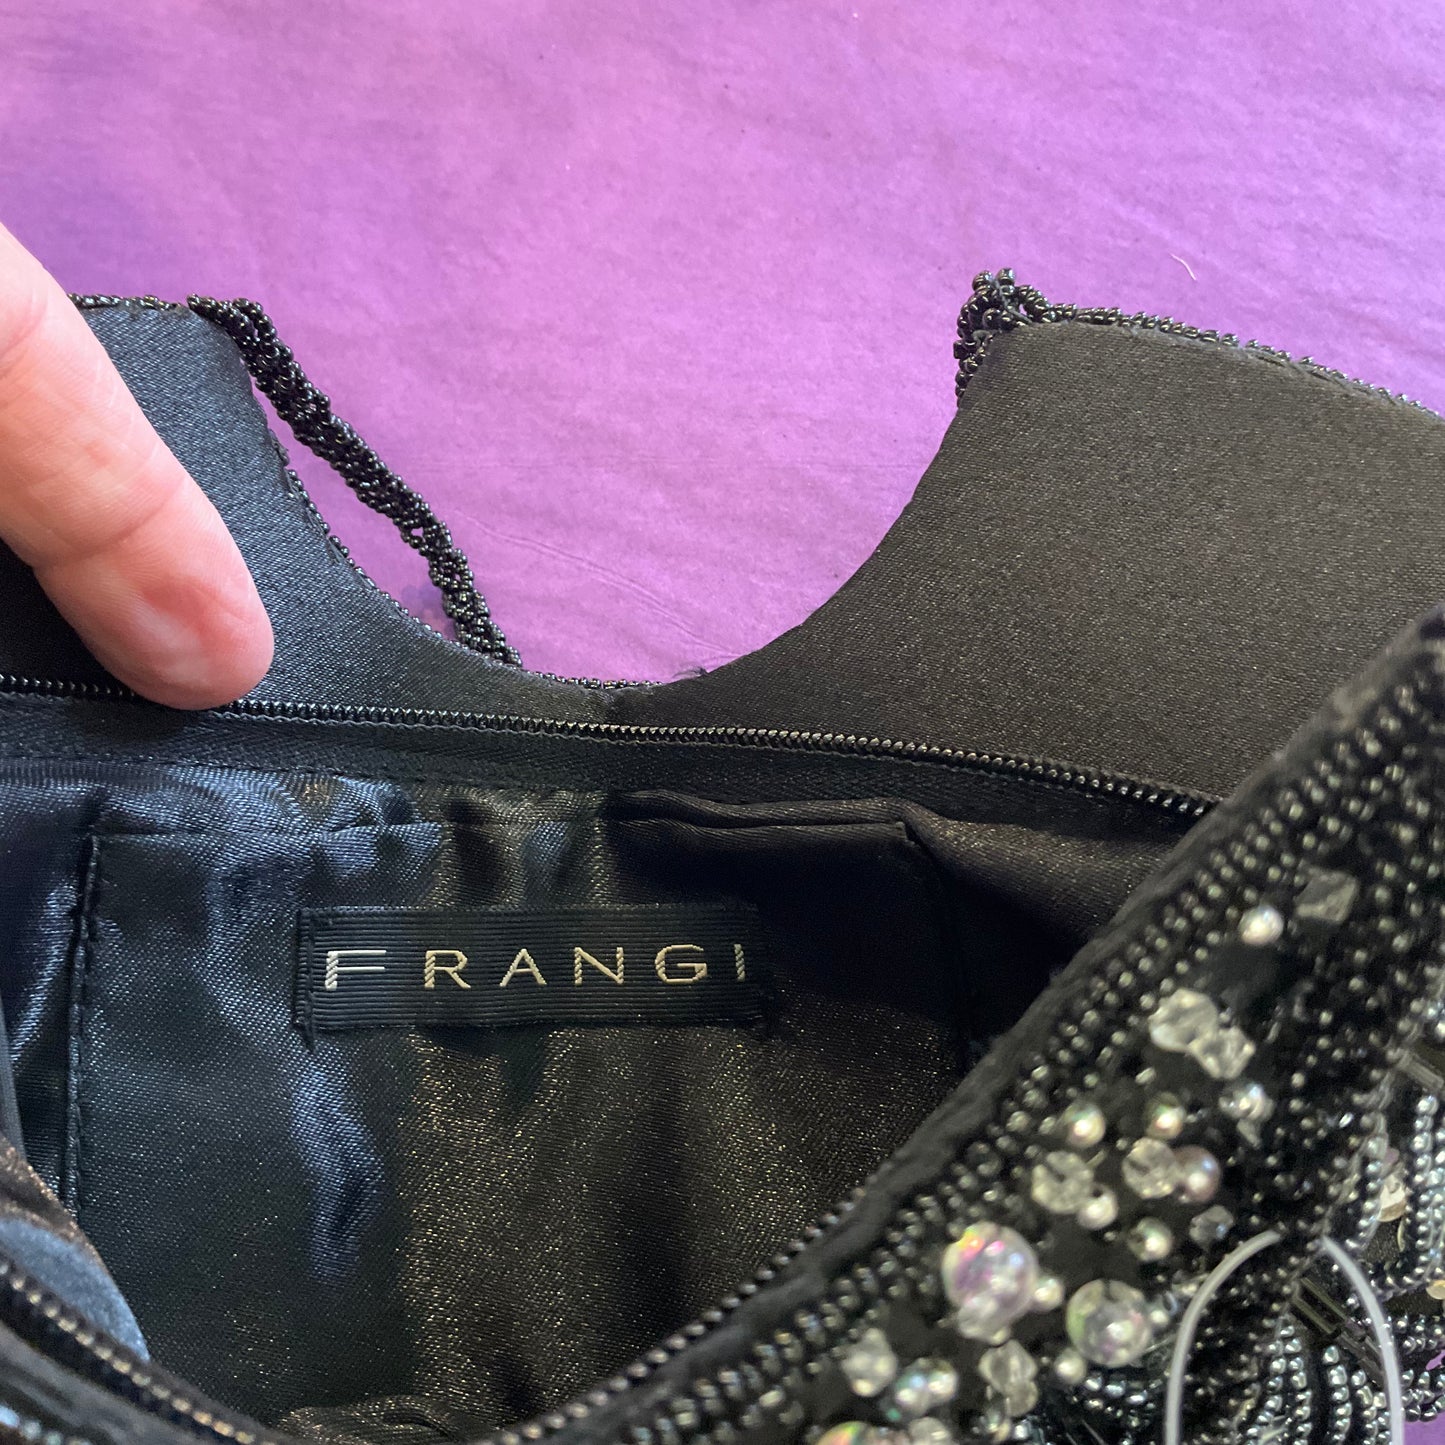 Vintage unused Black and silver art deco style Beaded evening bag by FRANGI for tie rack, prom, formal event, gift for her.